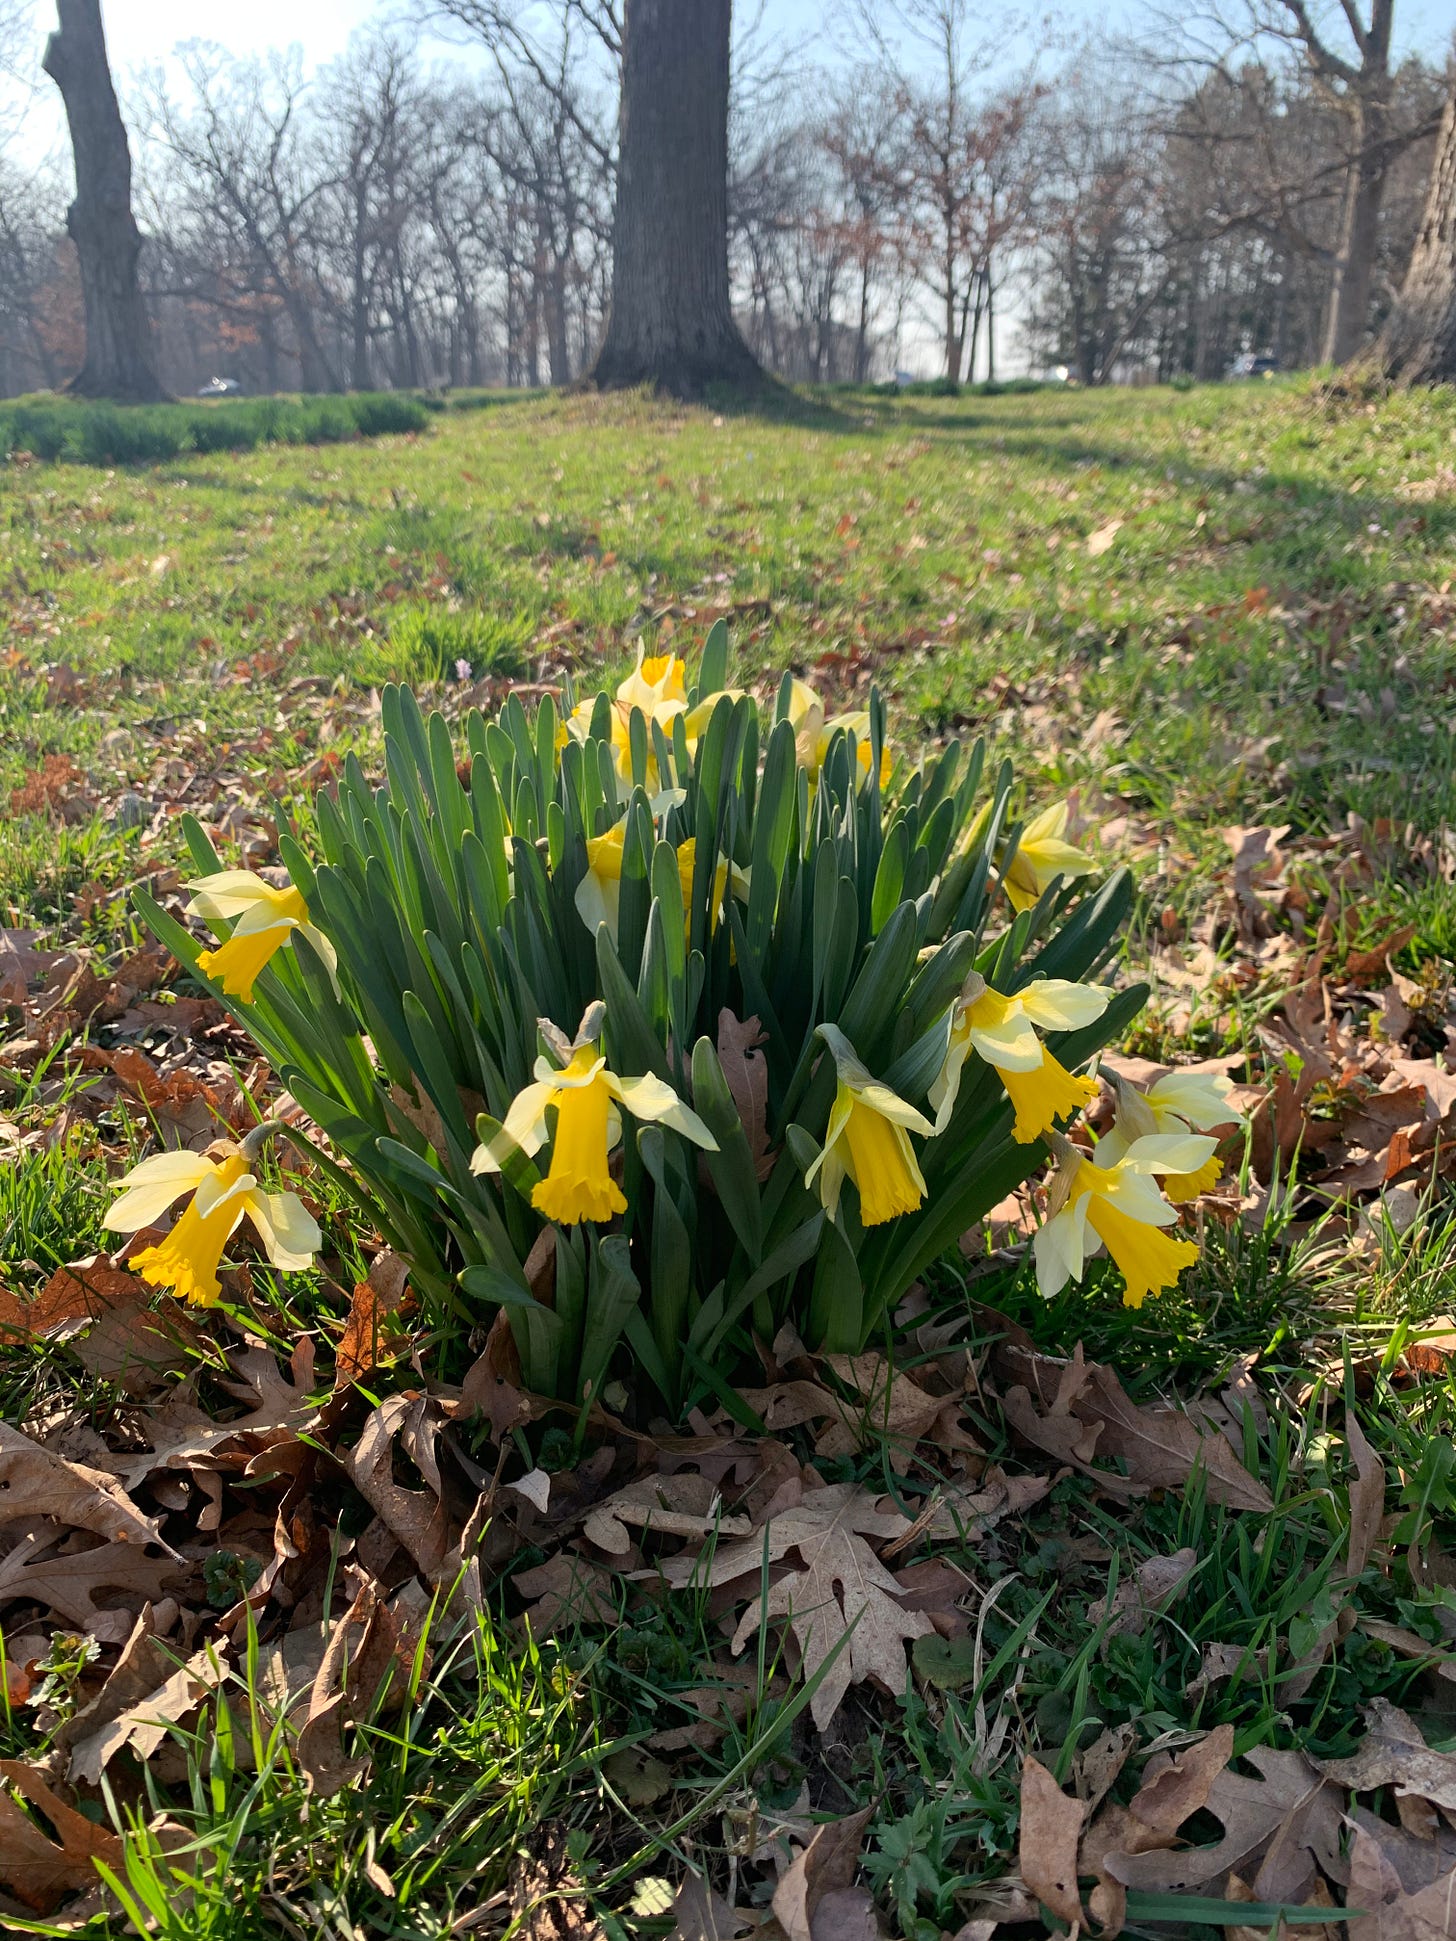 Clump of Narcissus (Daffodils) growing in a meadow